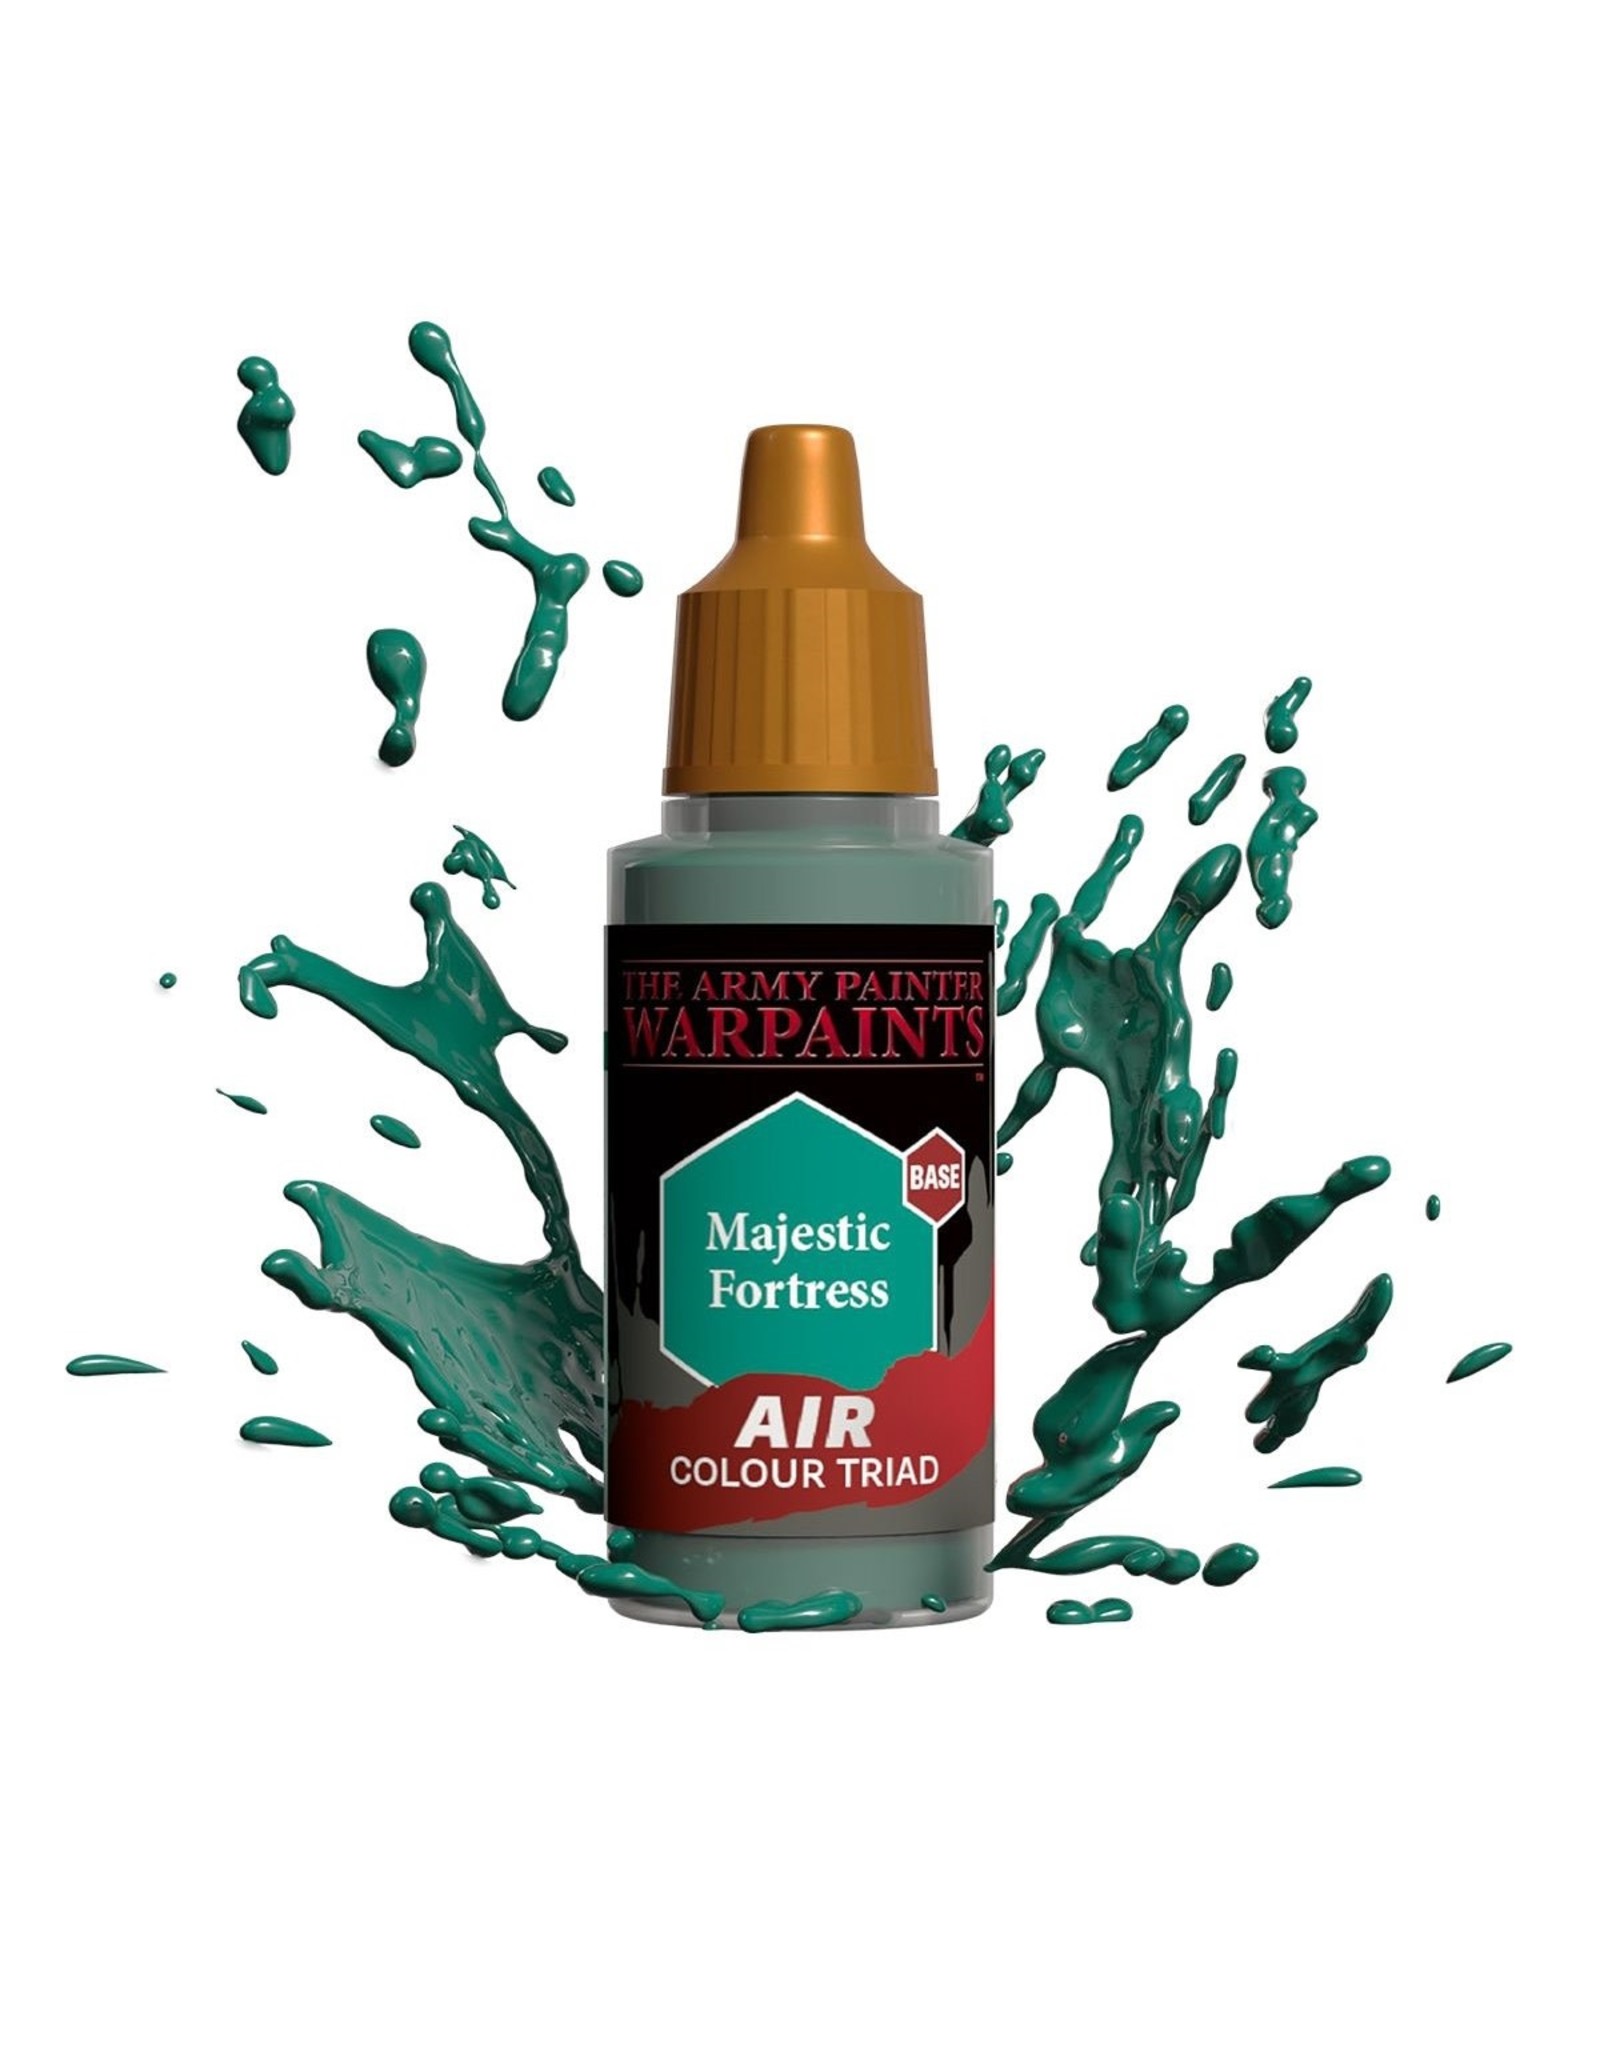 The Army Painter Warpaint Air: Majestic Fortress (18ml)